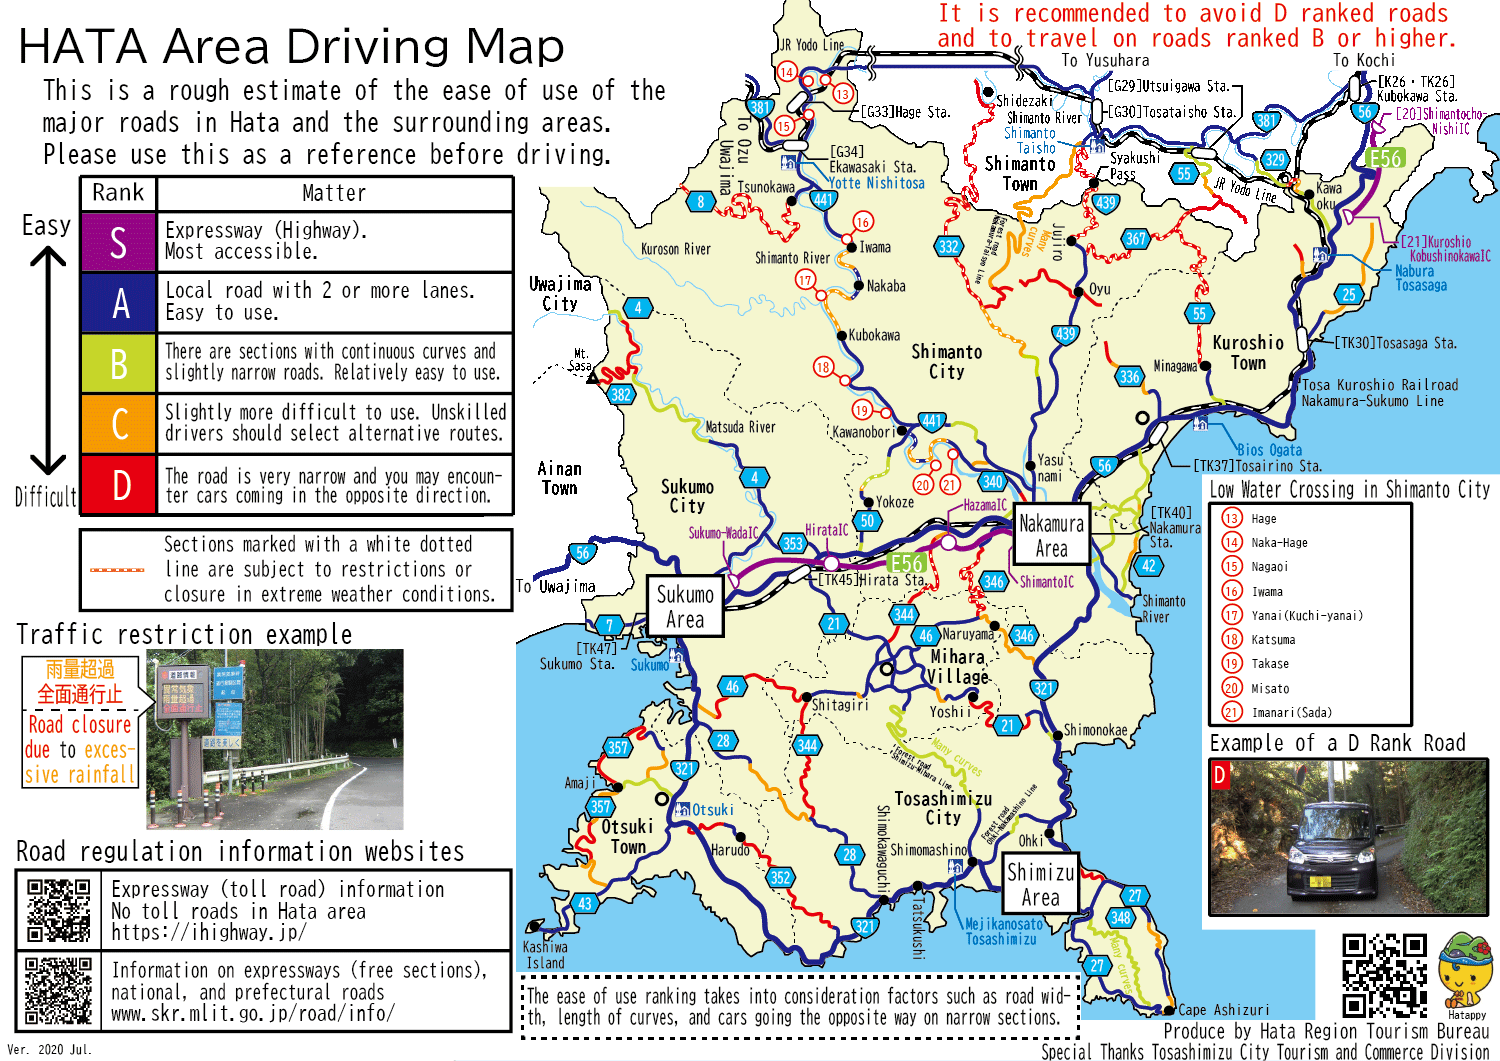 HATA Area Driving Map